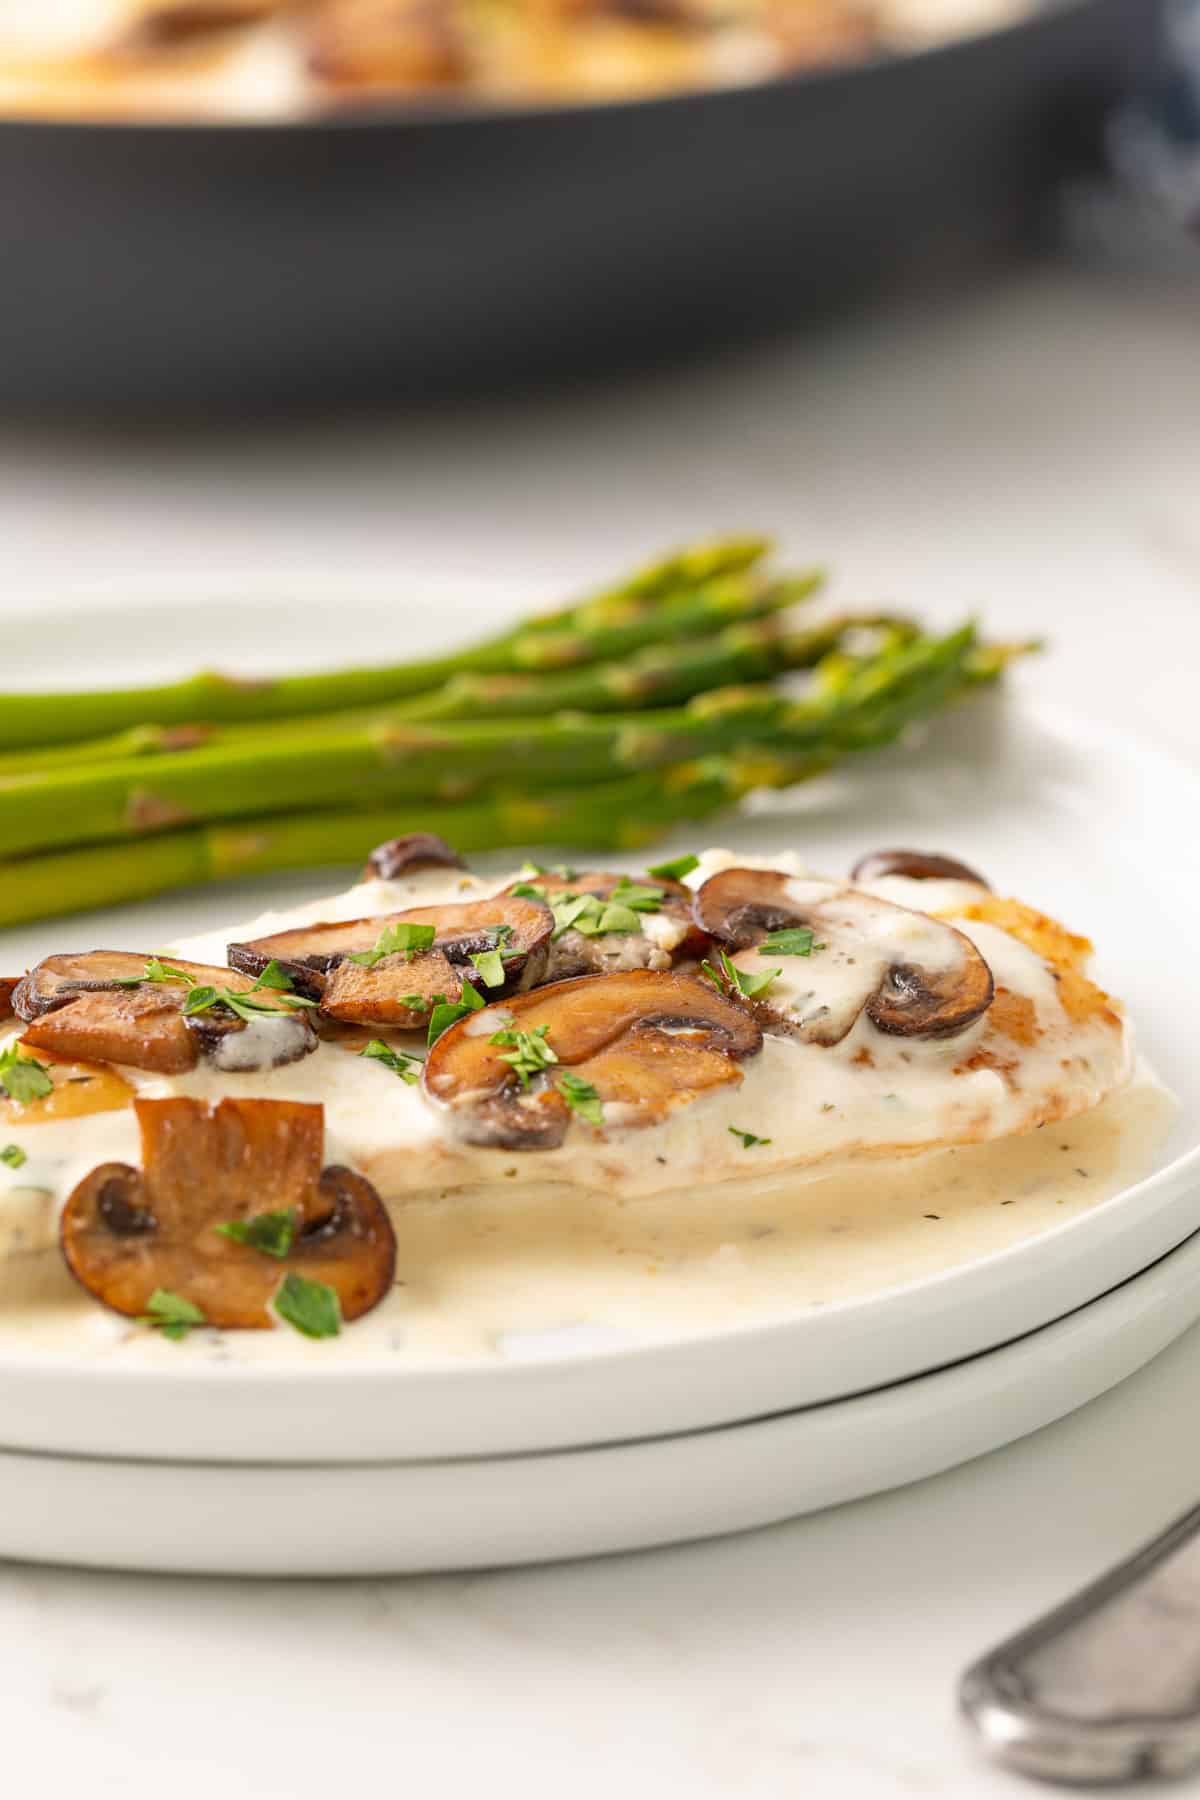 A chicken breast cutlet topped with mushroom sauce on a white plate with asparagus spears.